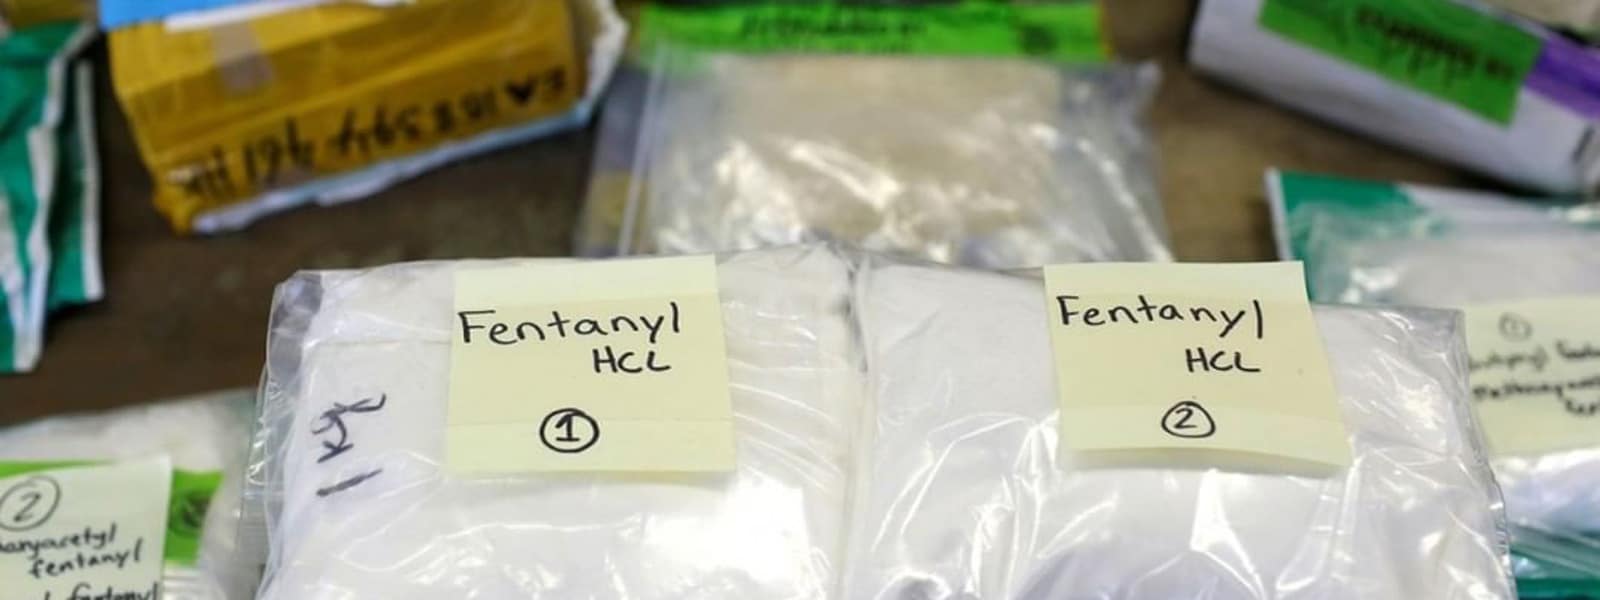 In 2018, US authorities began following a Bulgarian biochemist who they believed was running a small fentanyl laboratory in Mexico.